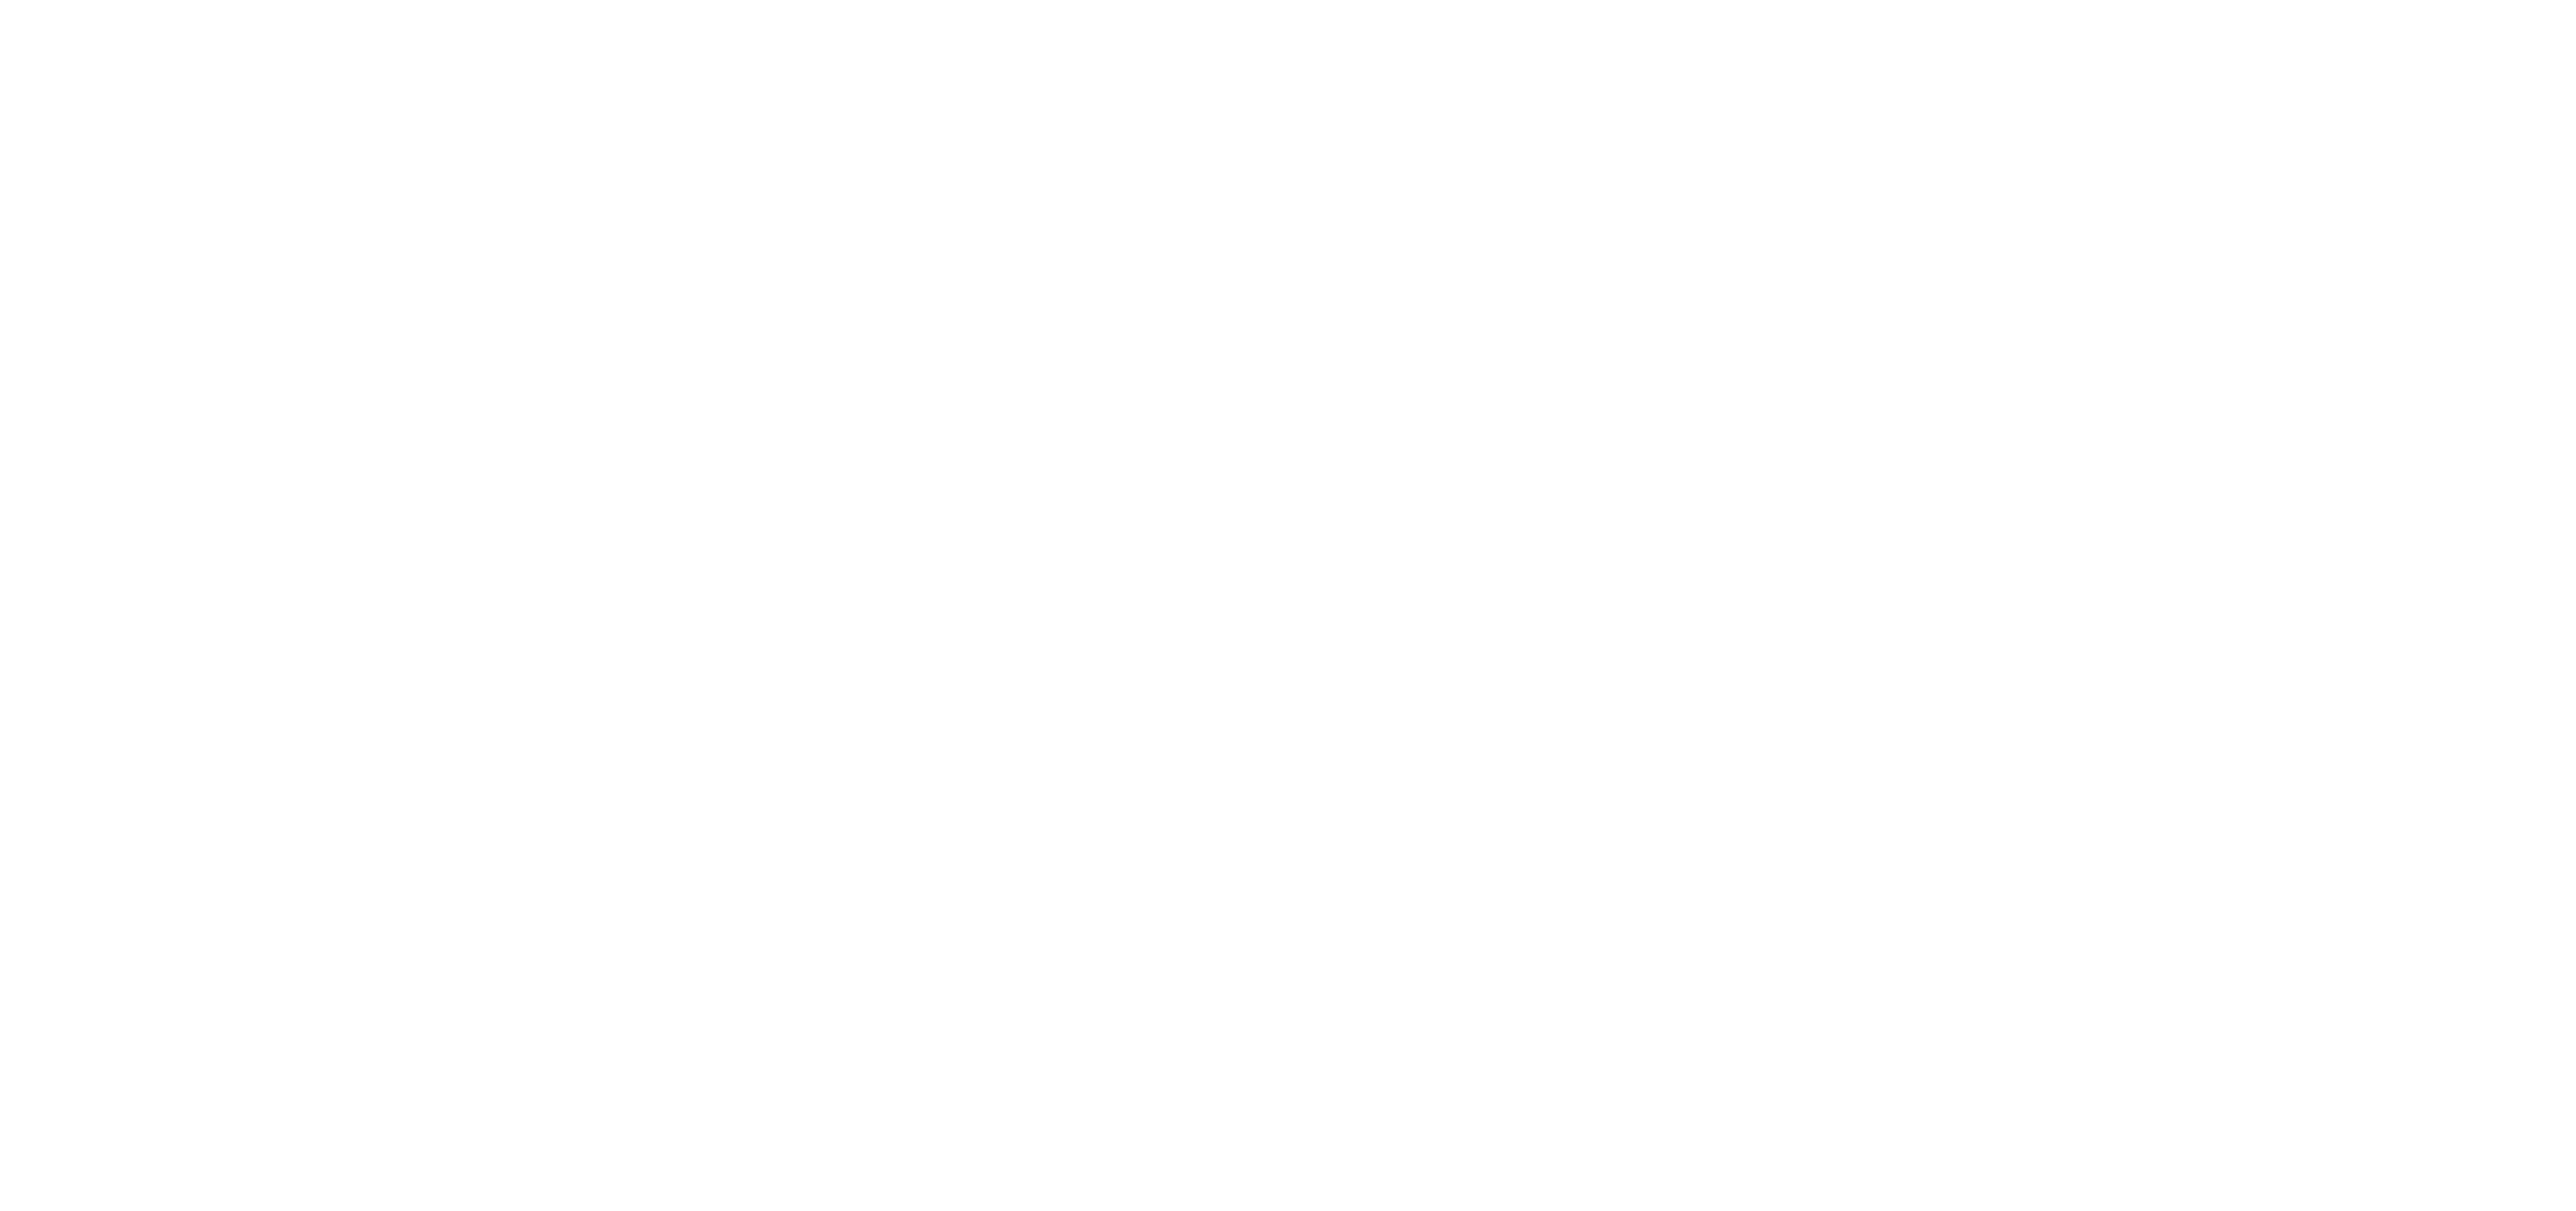 Legion Roofing and Construction Logo